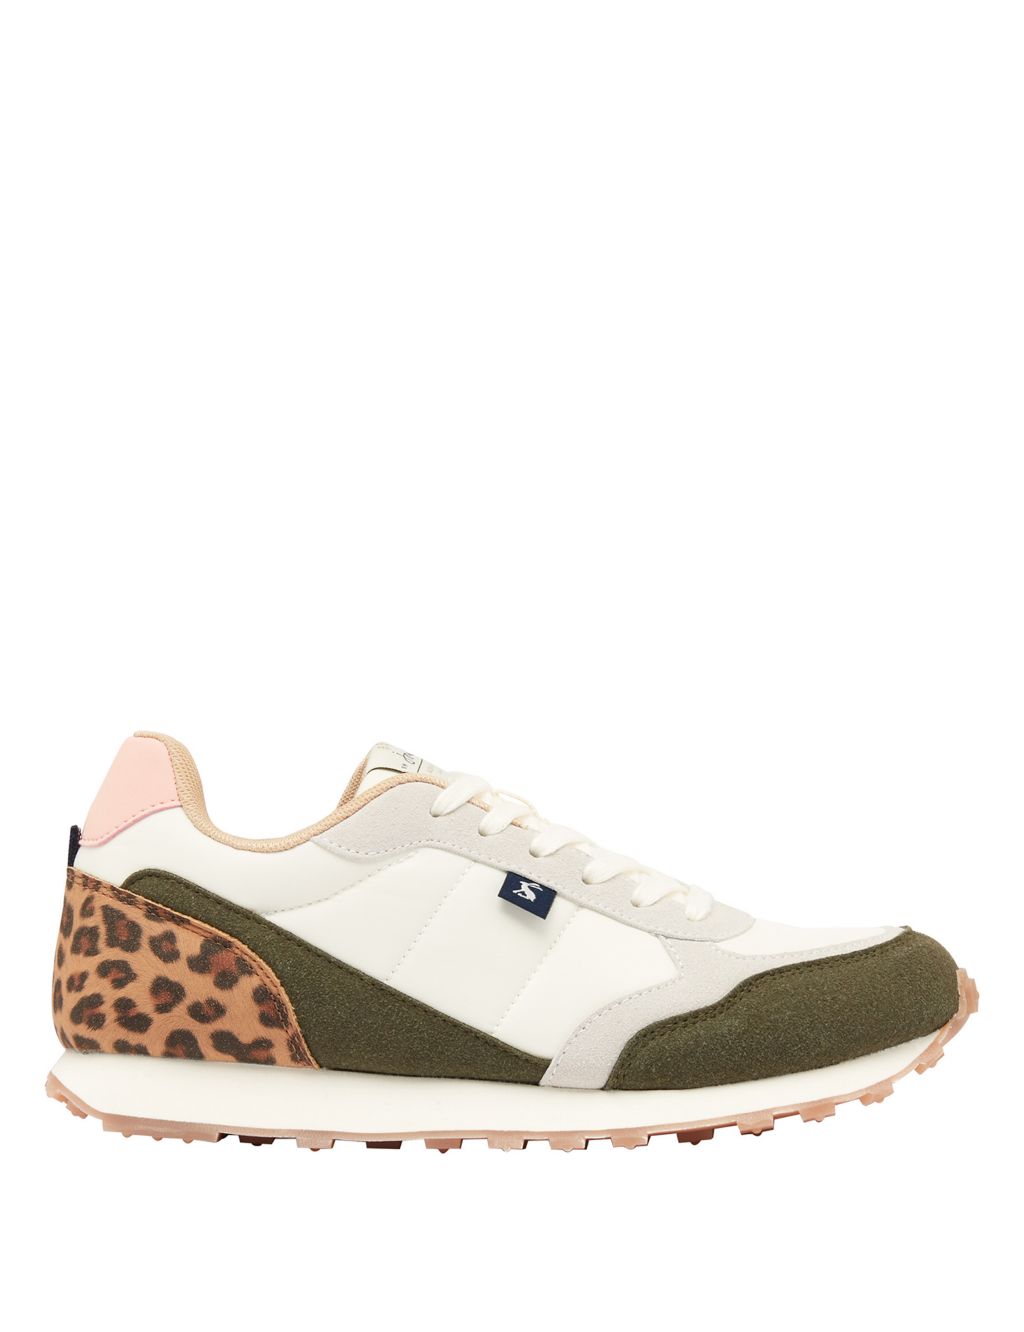 Lace Up Leopard Print Trainers image 1